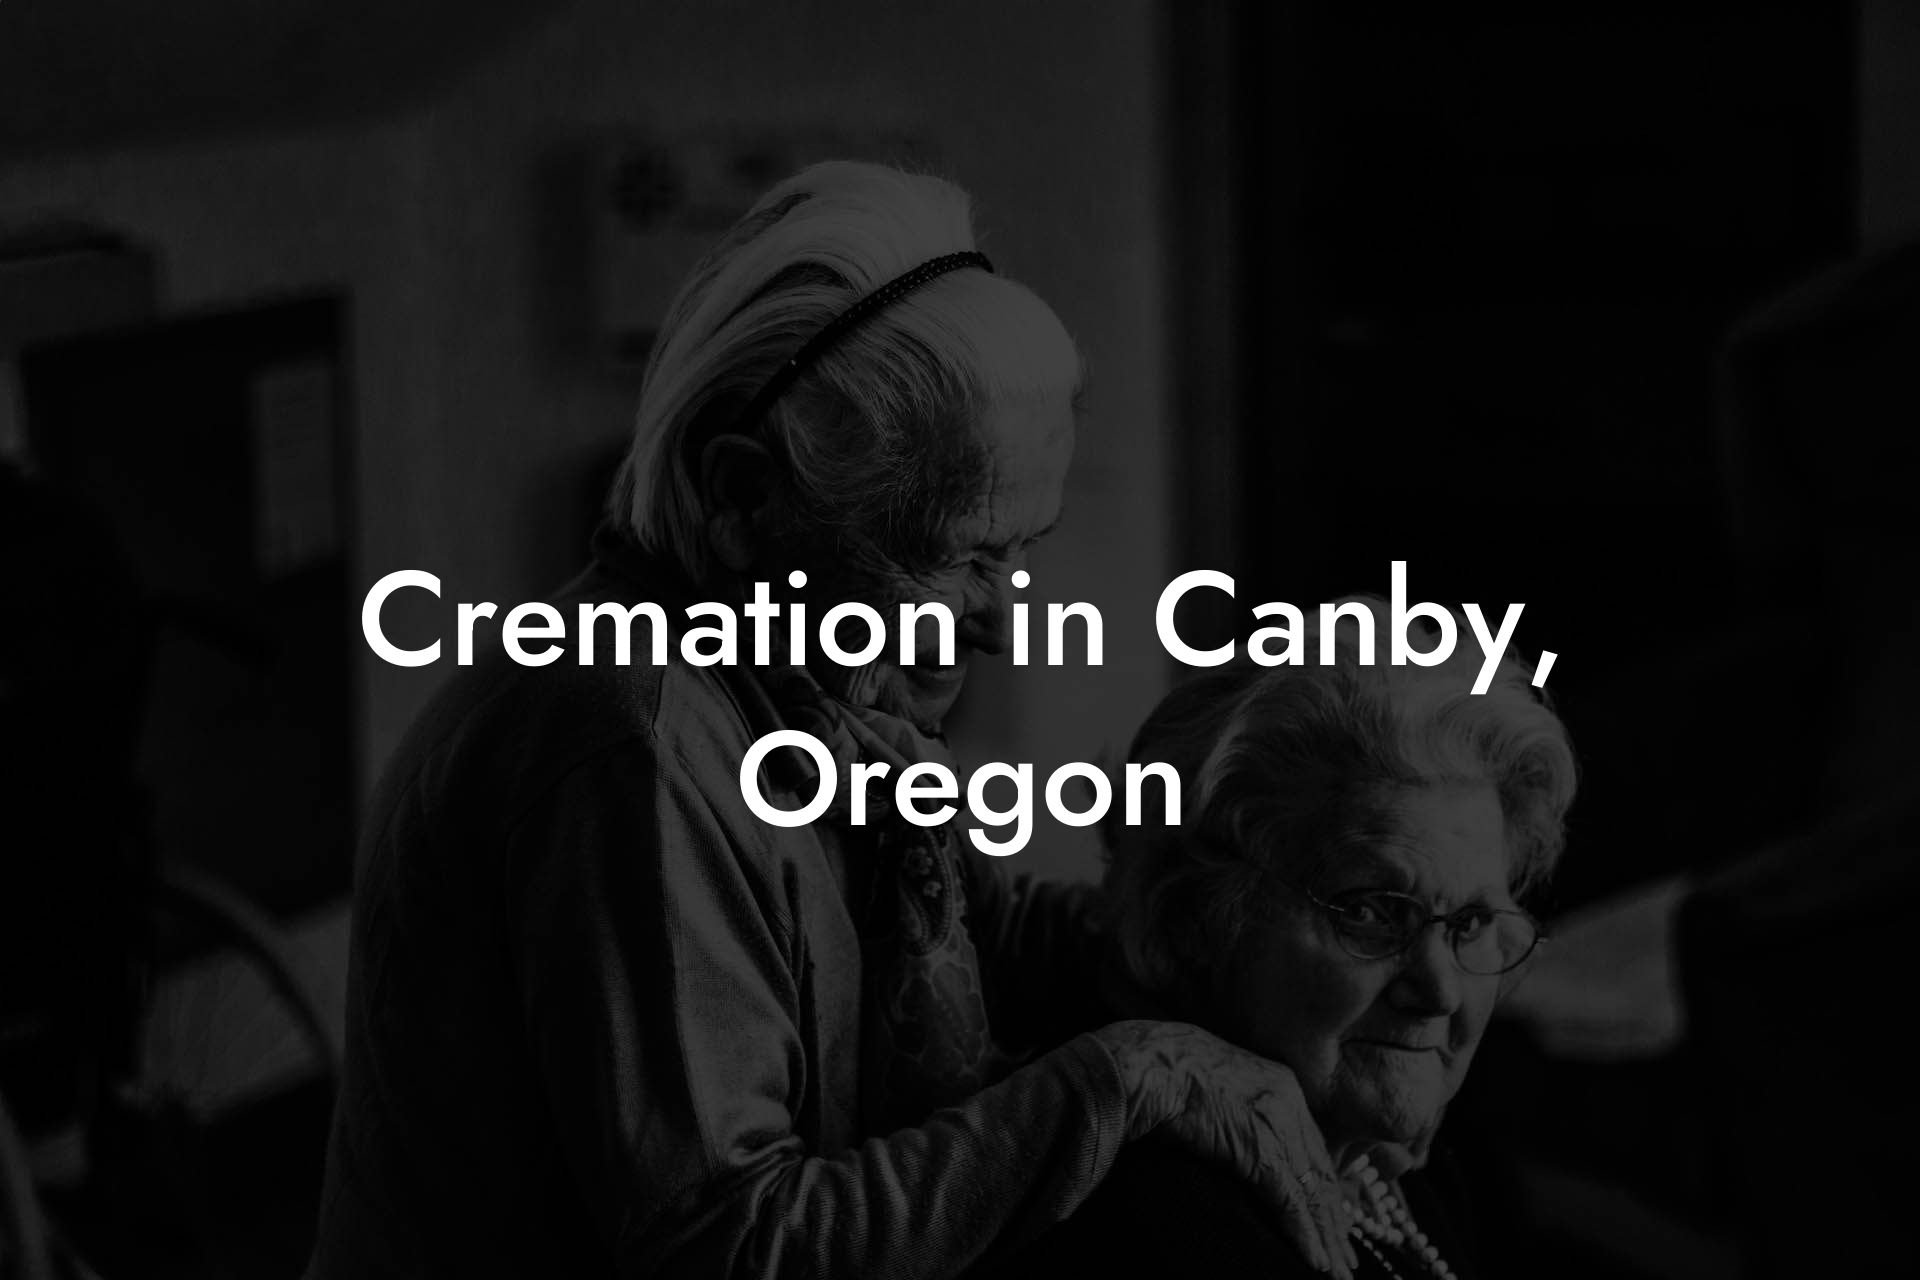 Cremation in Canby, Oregon